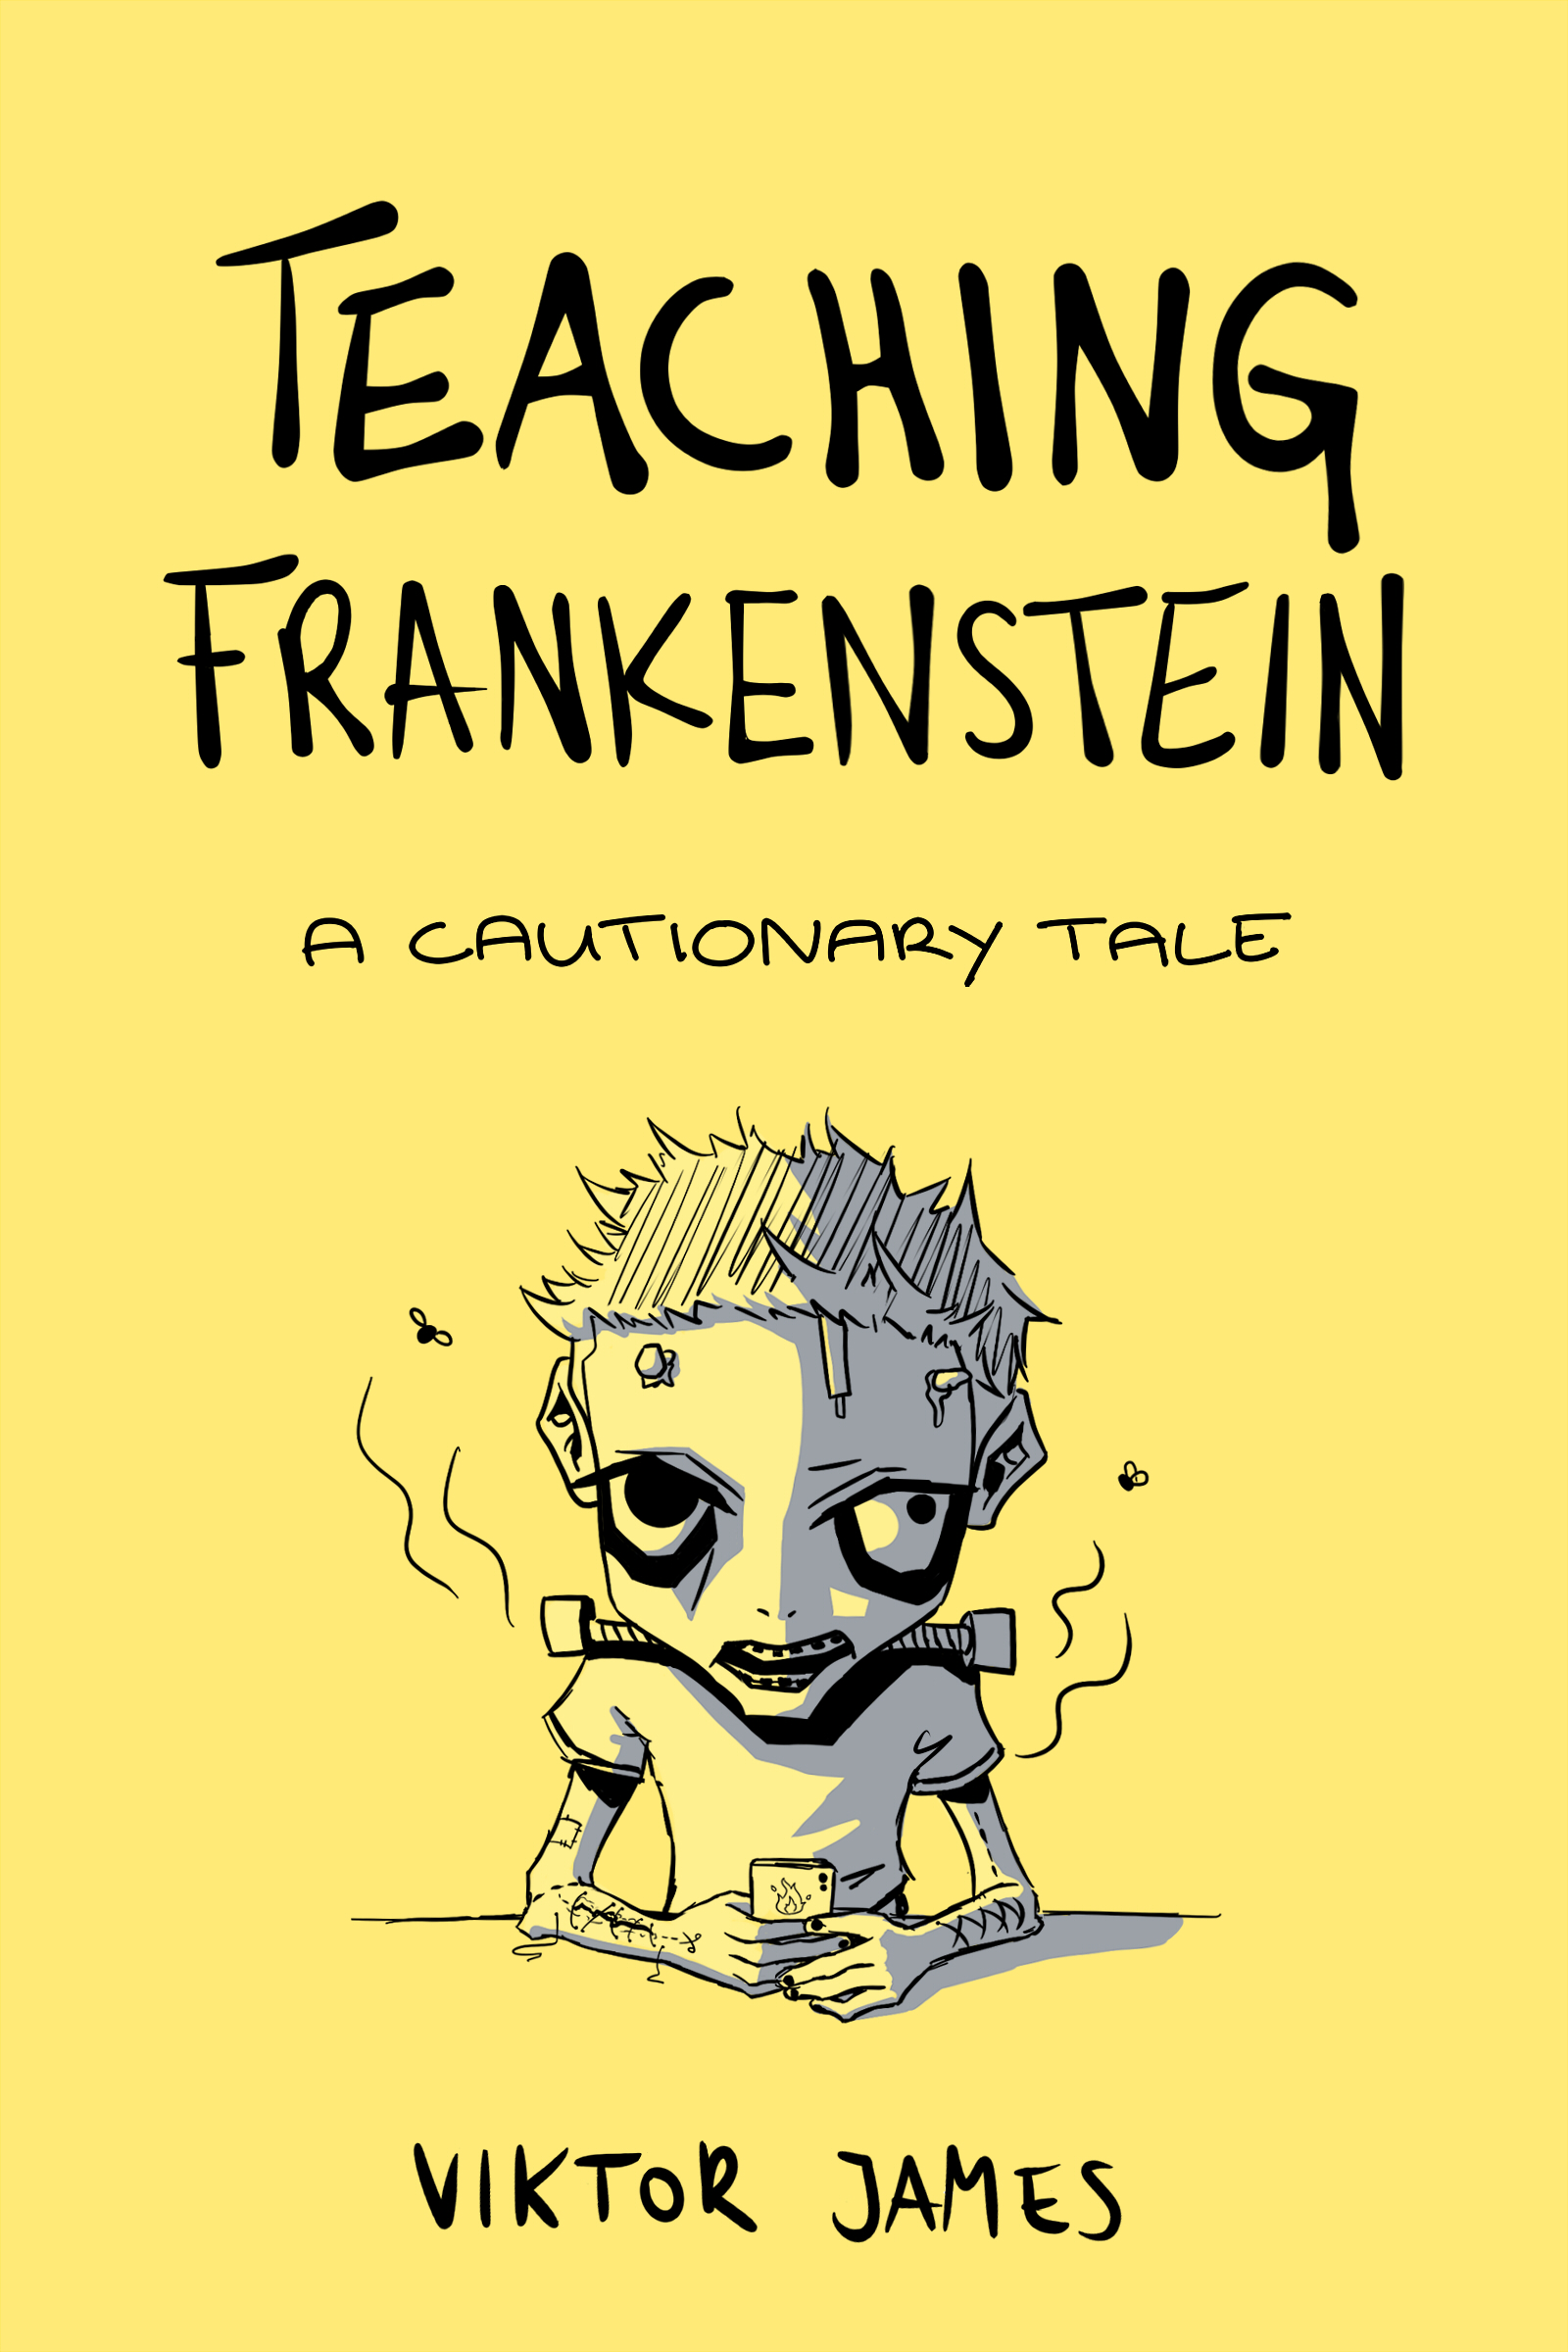 FREE: Teaching Frankenstein: A Cautionary Tale by Viktor James